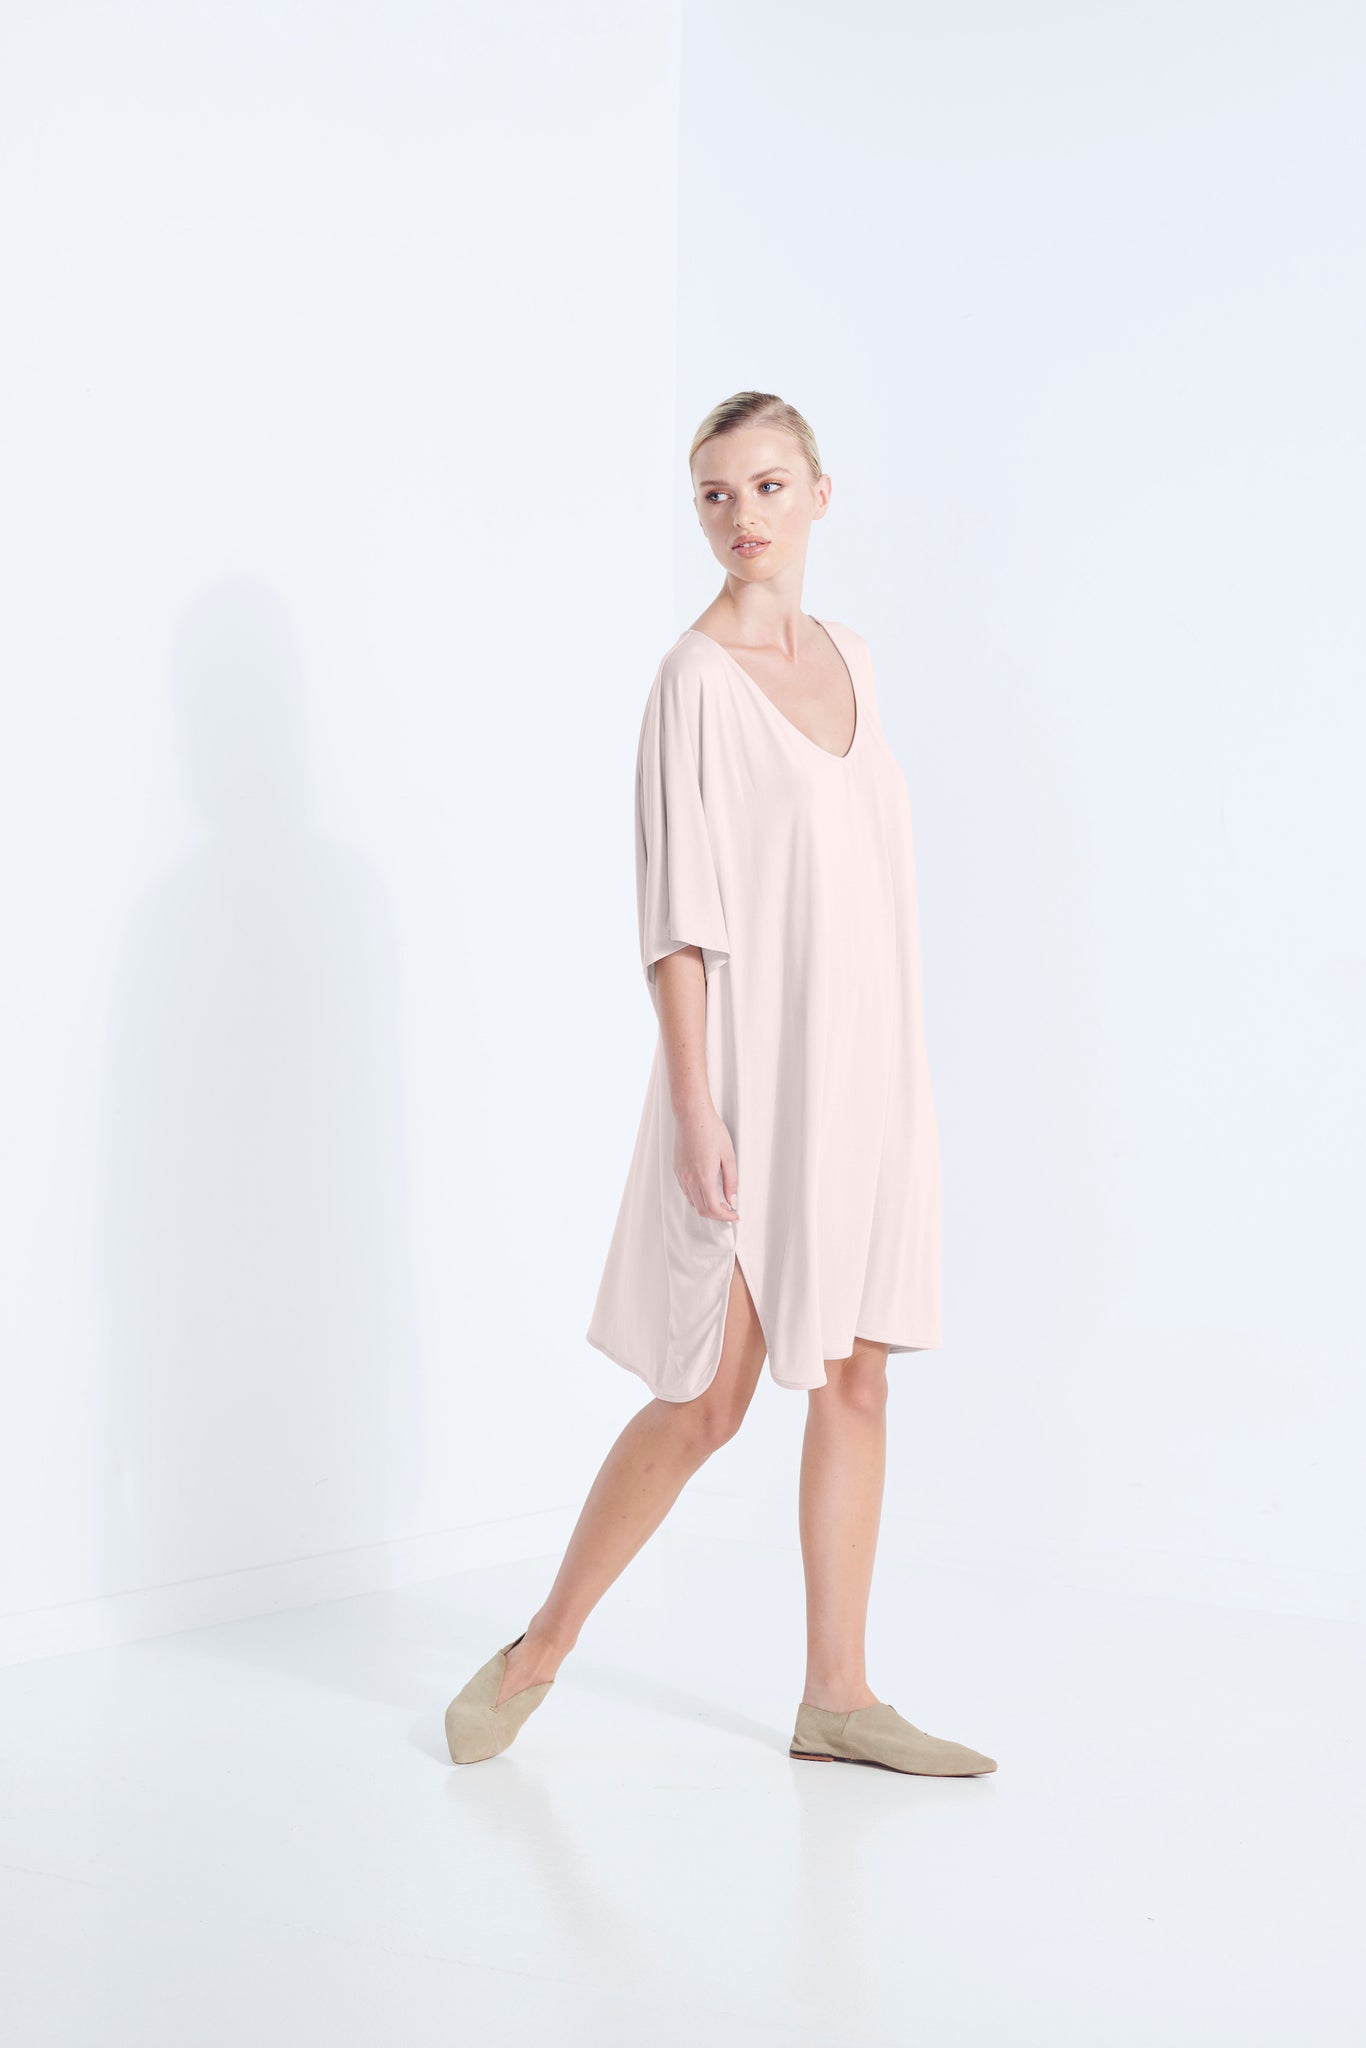 THEMIS DRESS LONGLINE T-SHIRT BEECHWOOD MODAL STRETCH WITH REMOVABLE TIE PIPISHELL WASHED PALE PINK  SIDE VIEW